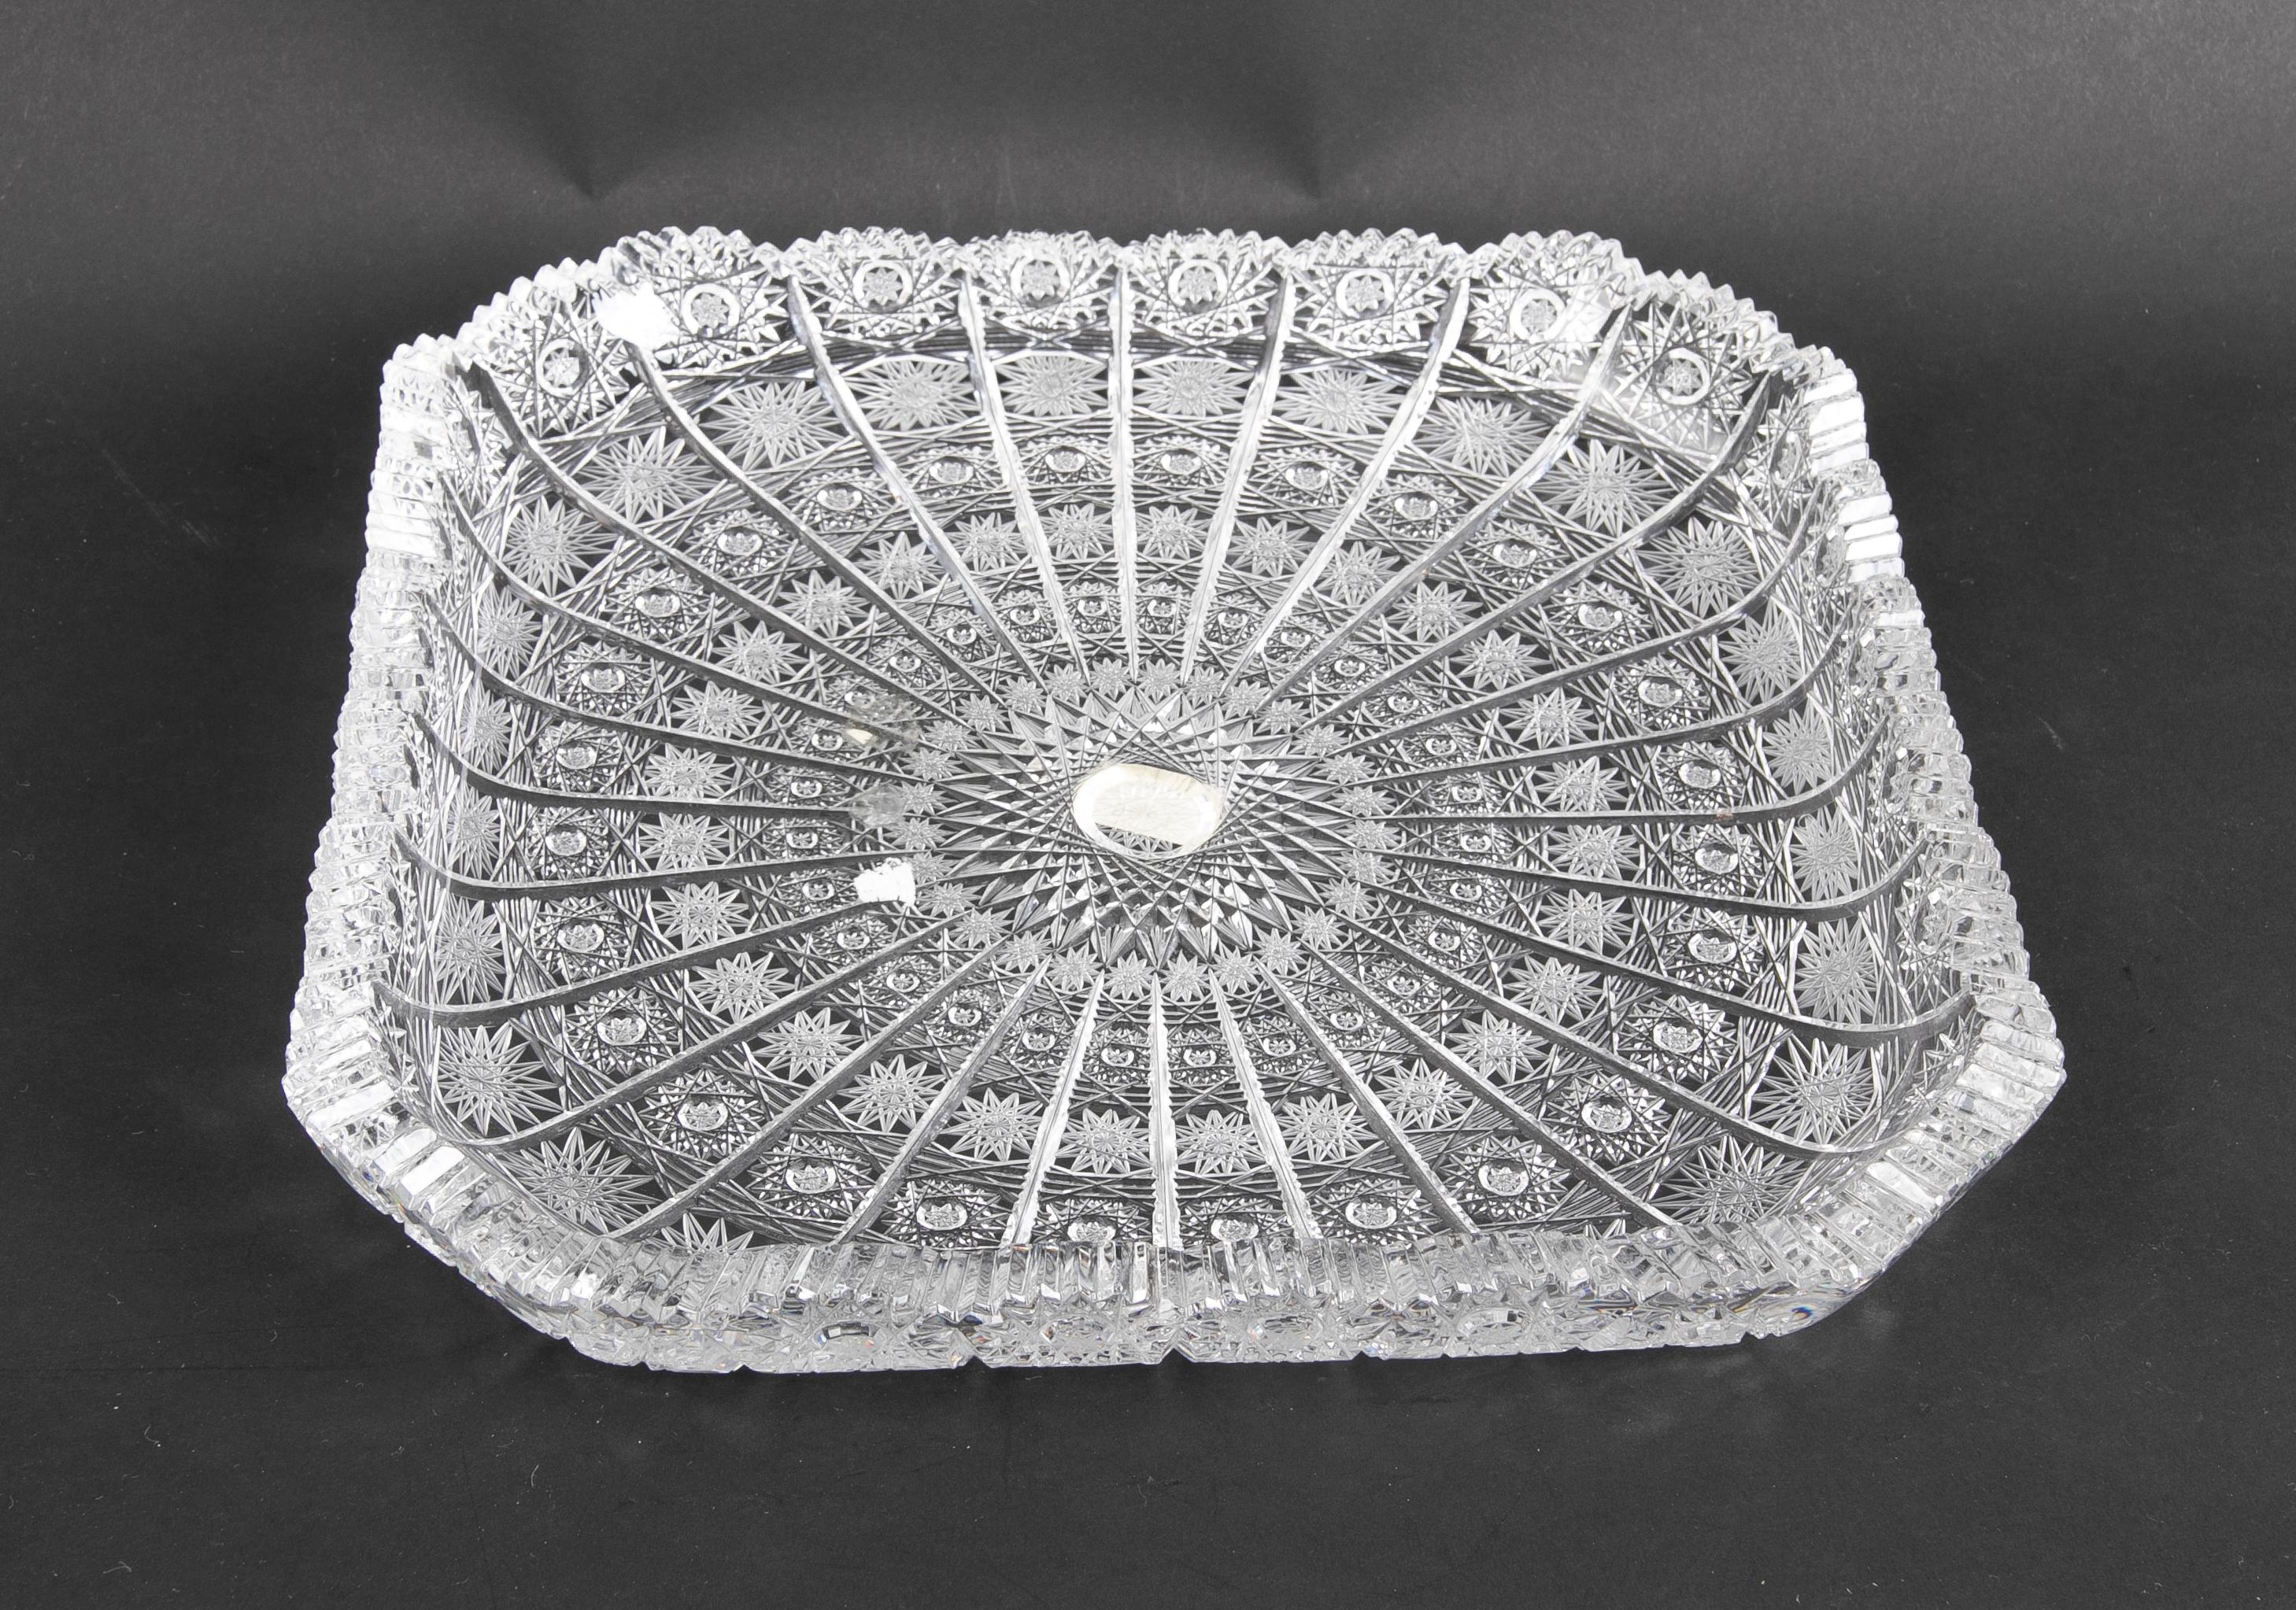 Square Hand-Cut Bohemian Crystal Tray For Sale 3